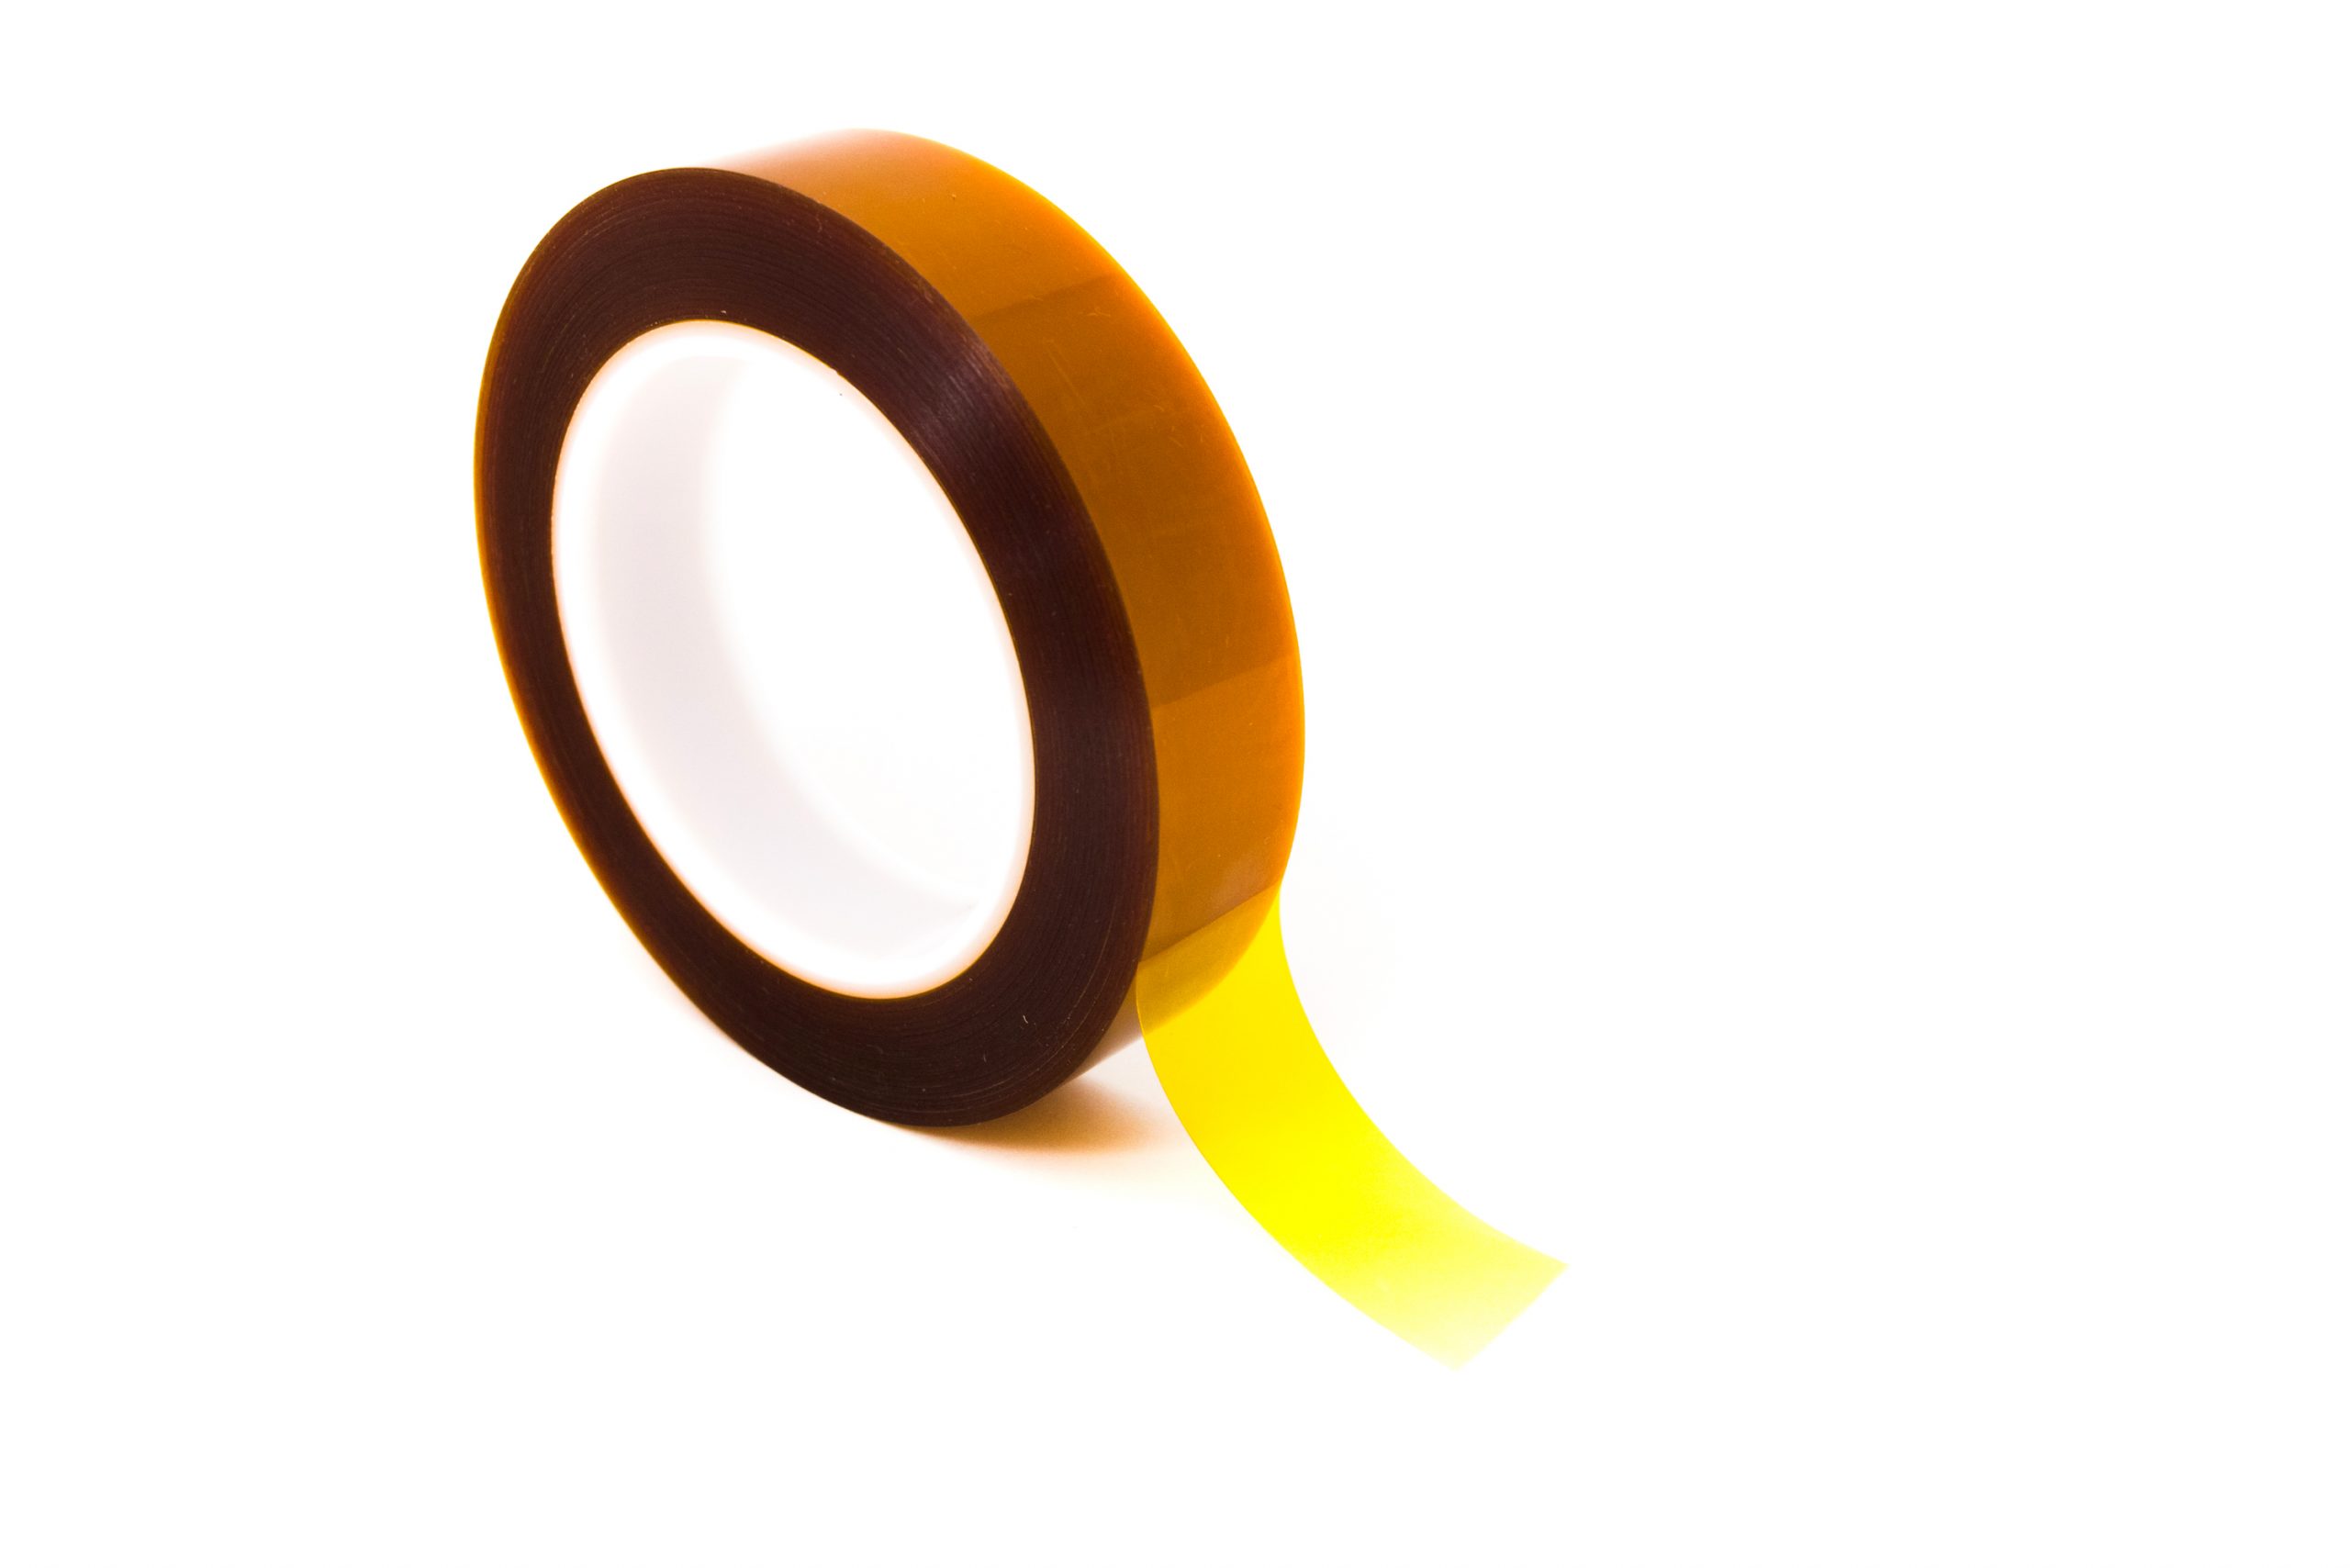 Double Sided Polyimide Tapes